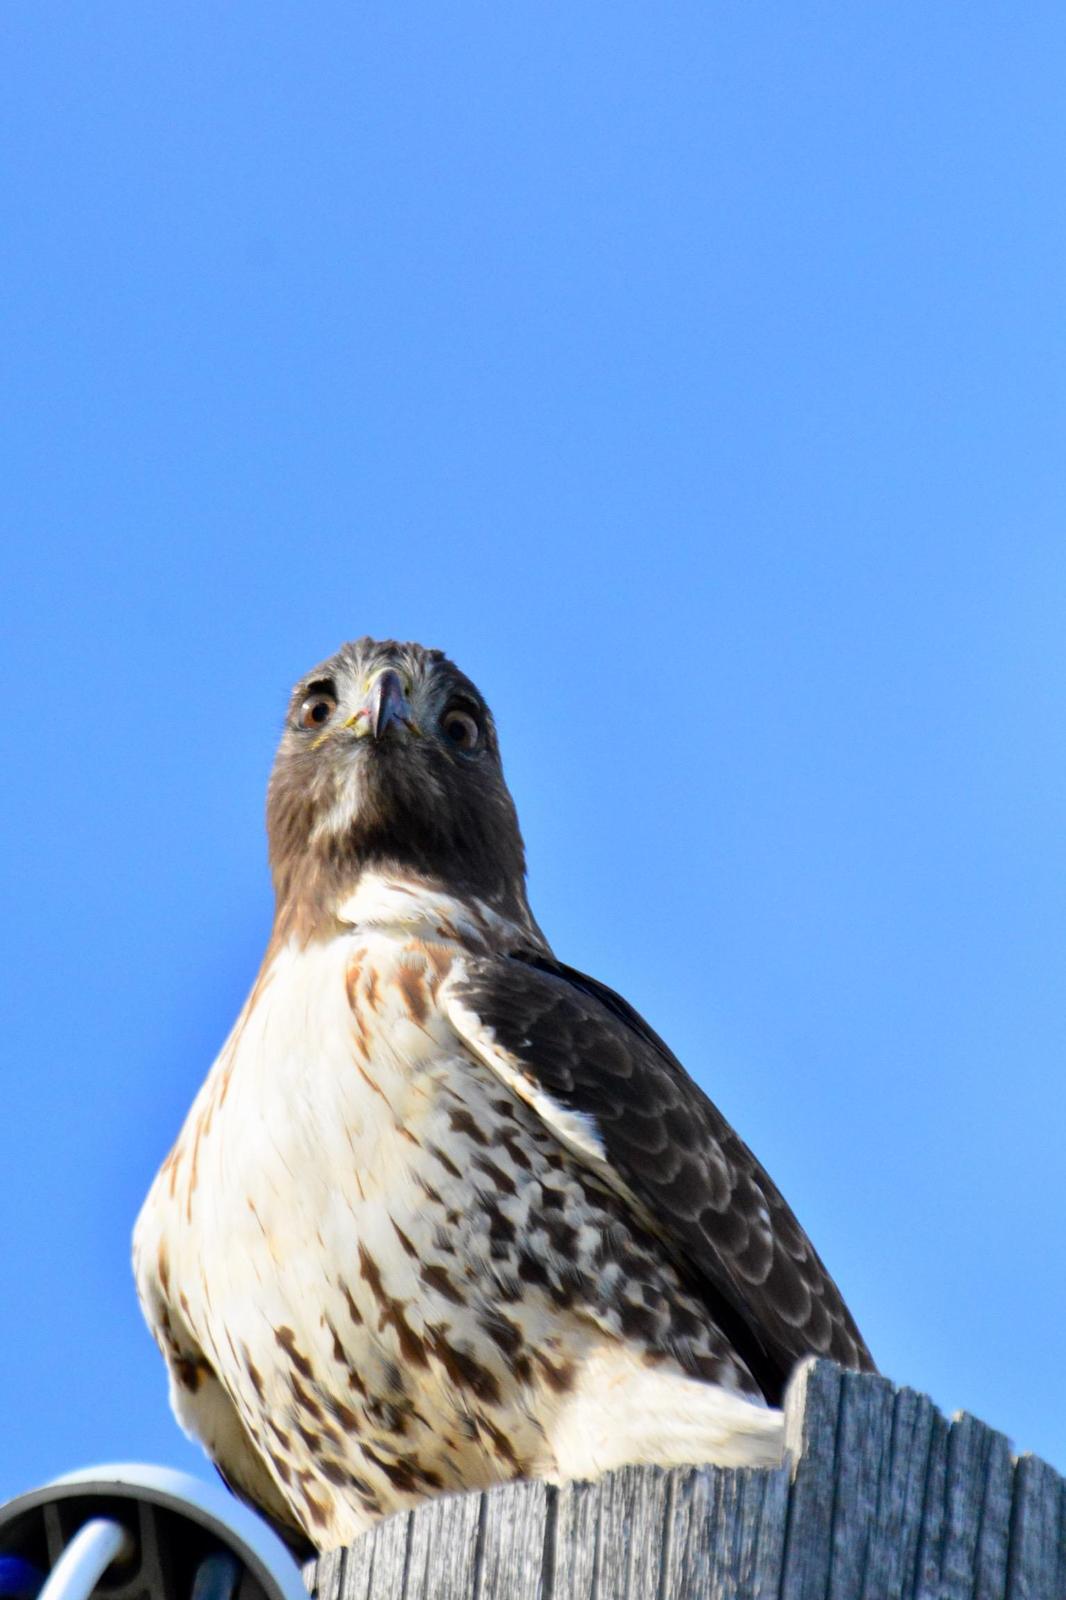 Red-tailed Hawk Photo by Linda Cote